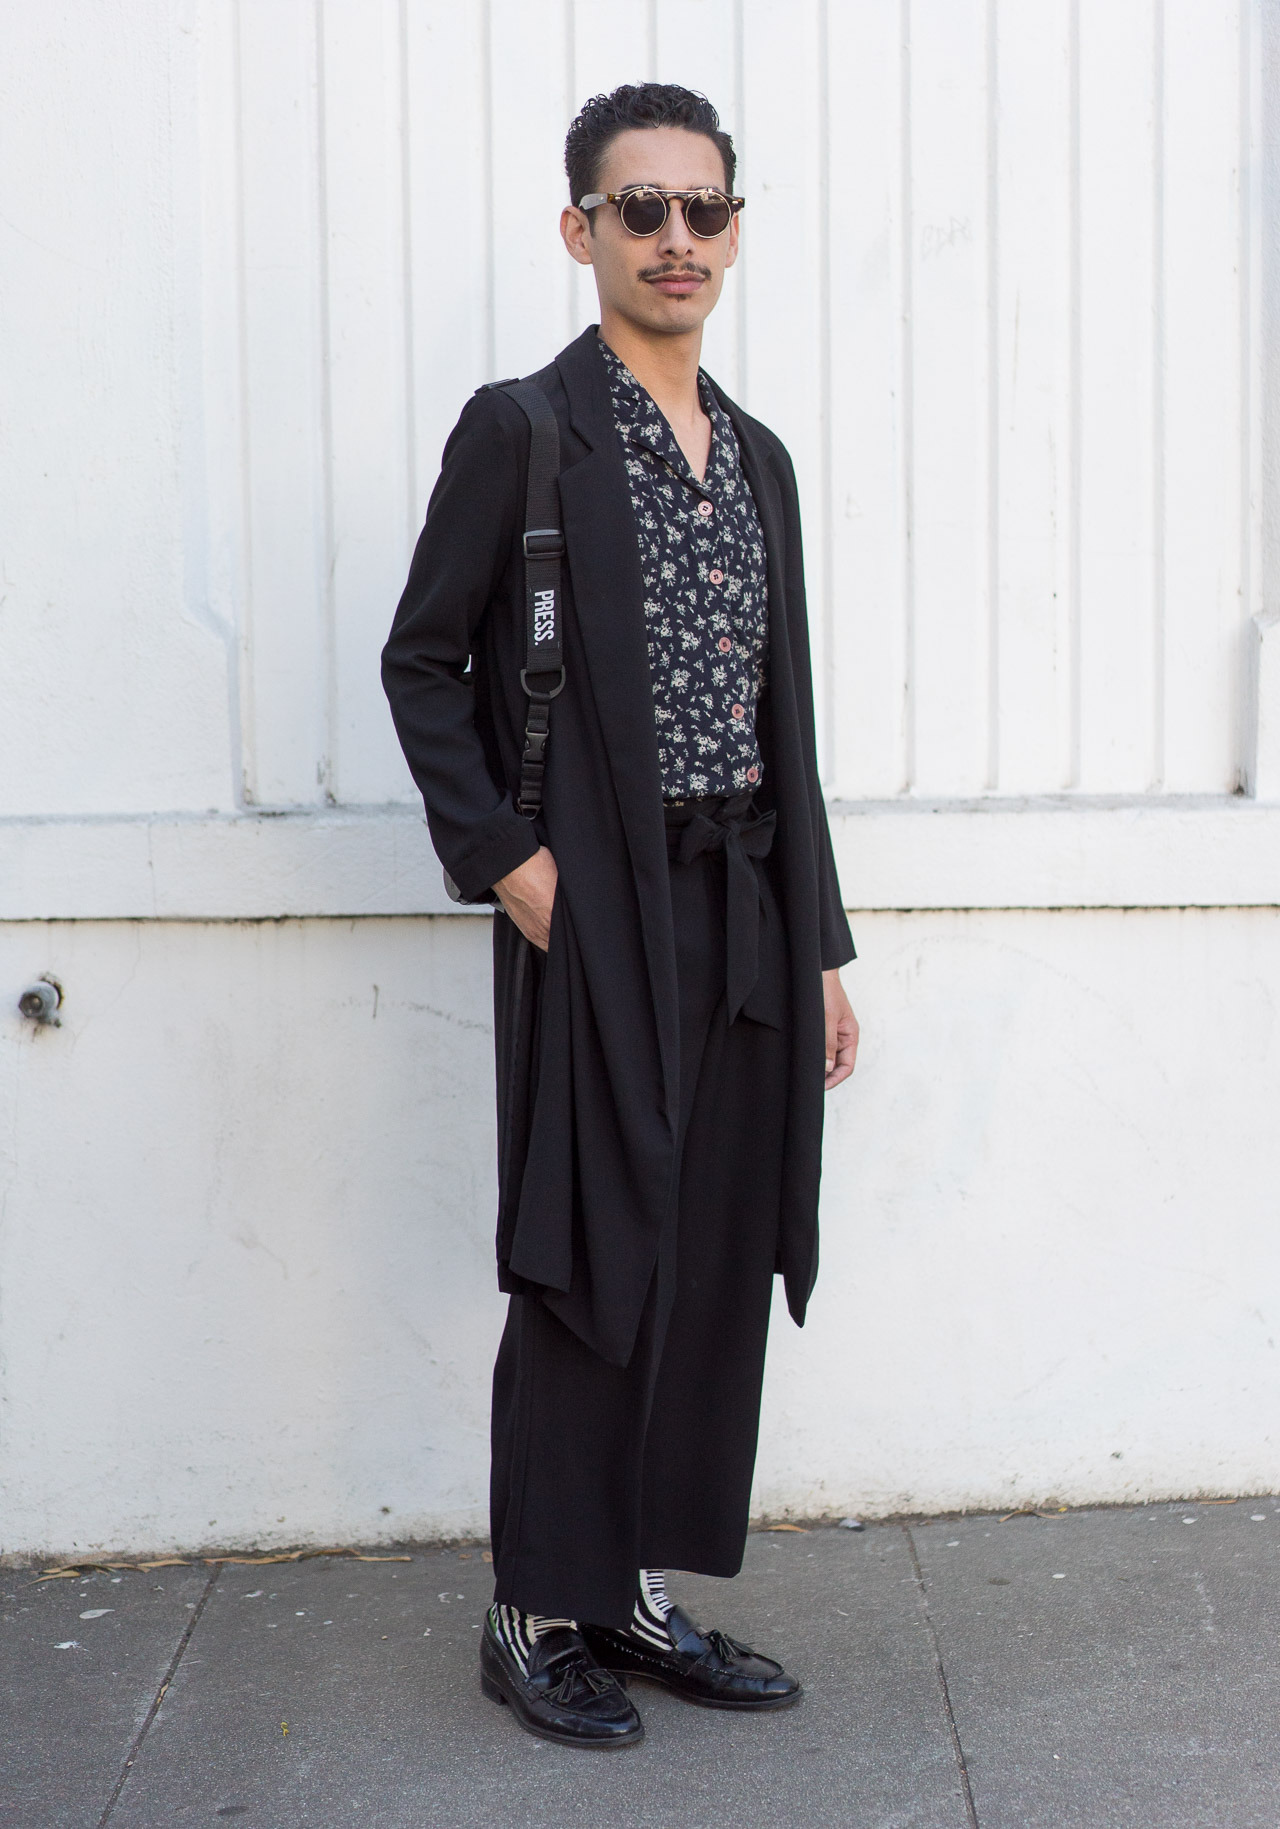 SF Looks — J.D., 24 “My style is defined by the...